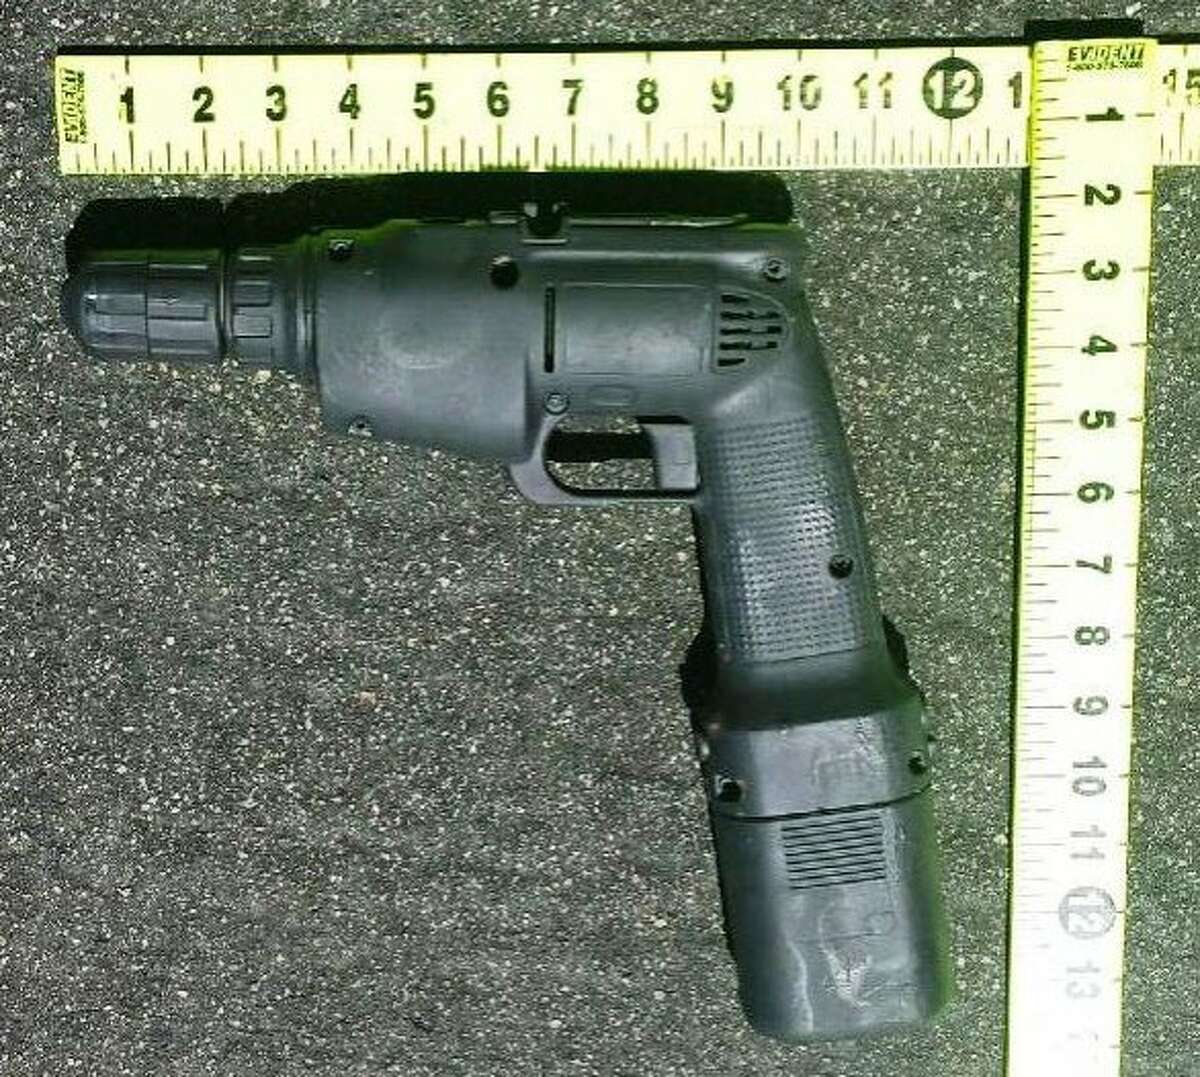 San Jose police shot and killed a 19-year-old woman Thursday who was holding this drill. The woman was shot near Blossom Hill Road and Playa Del Rey shortly before 11 a.m.